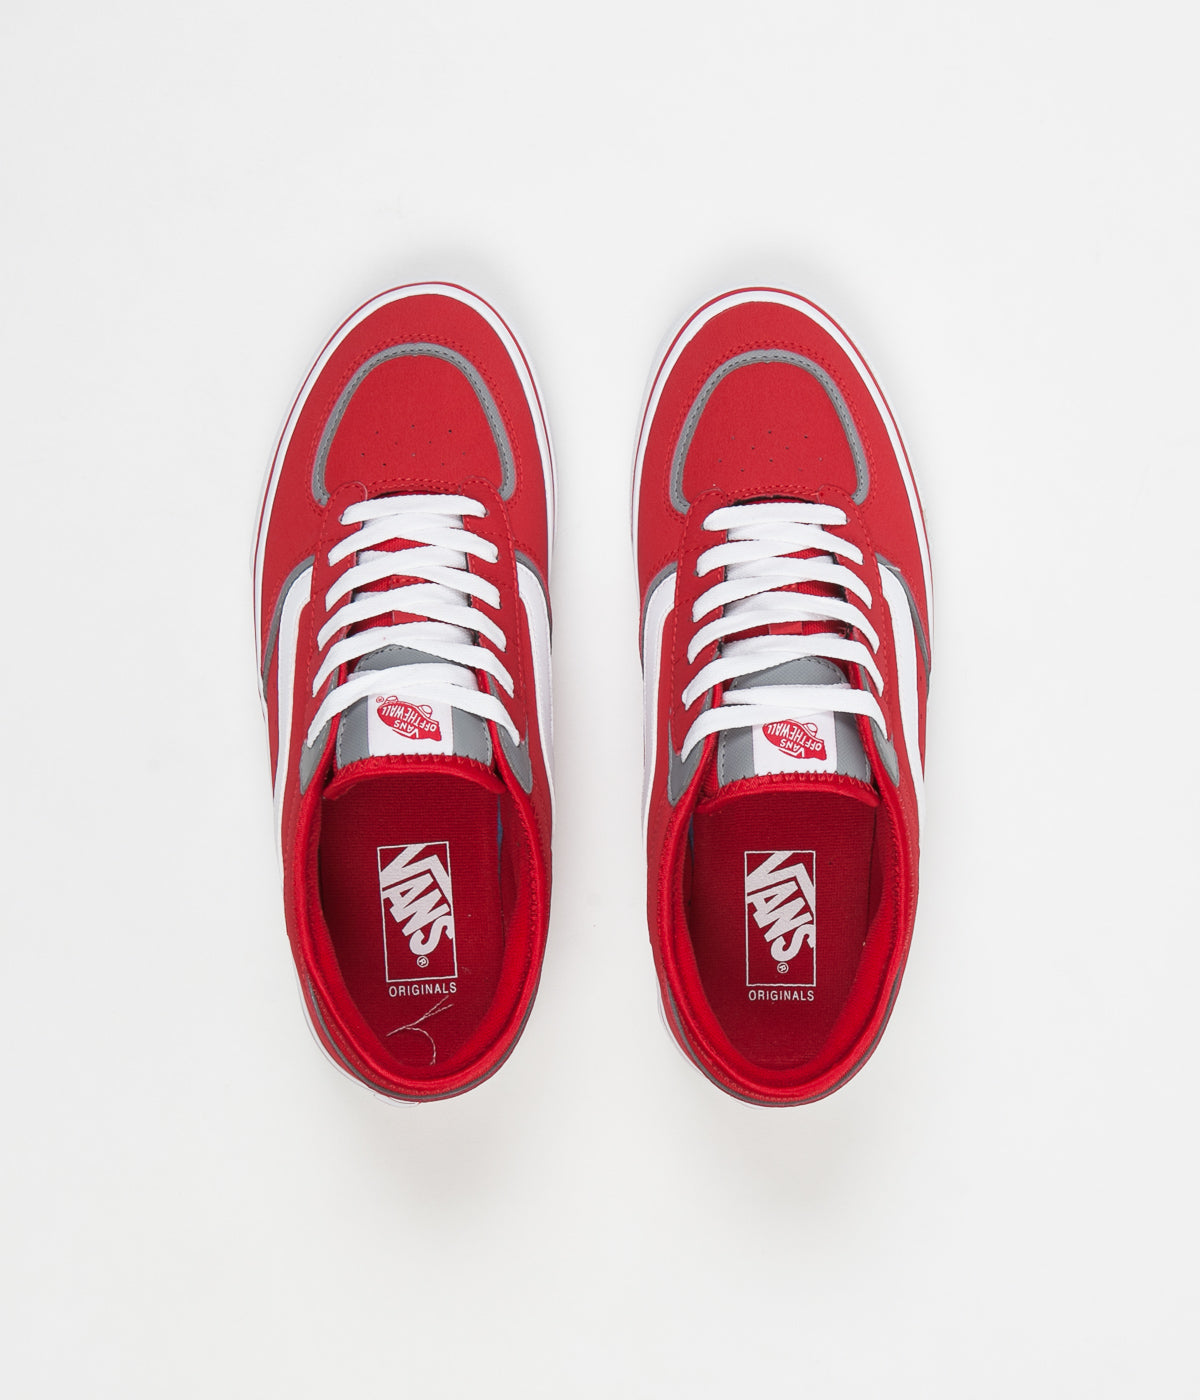 Vans Rowley Classic LX Shoes - Racing Red / White | Flatspot